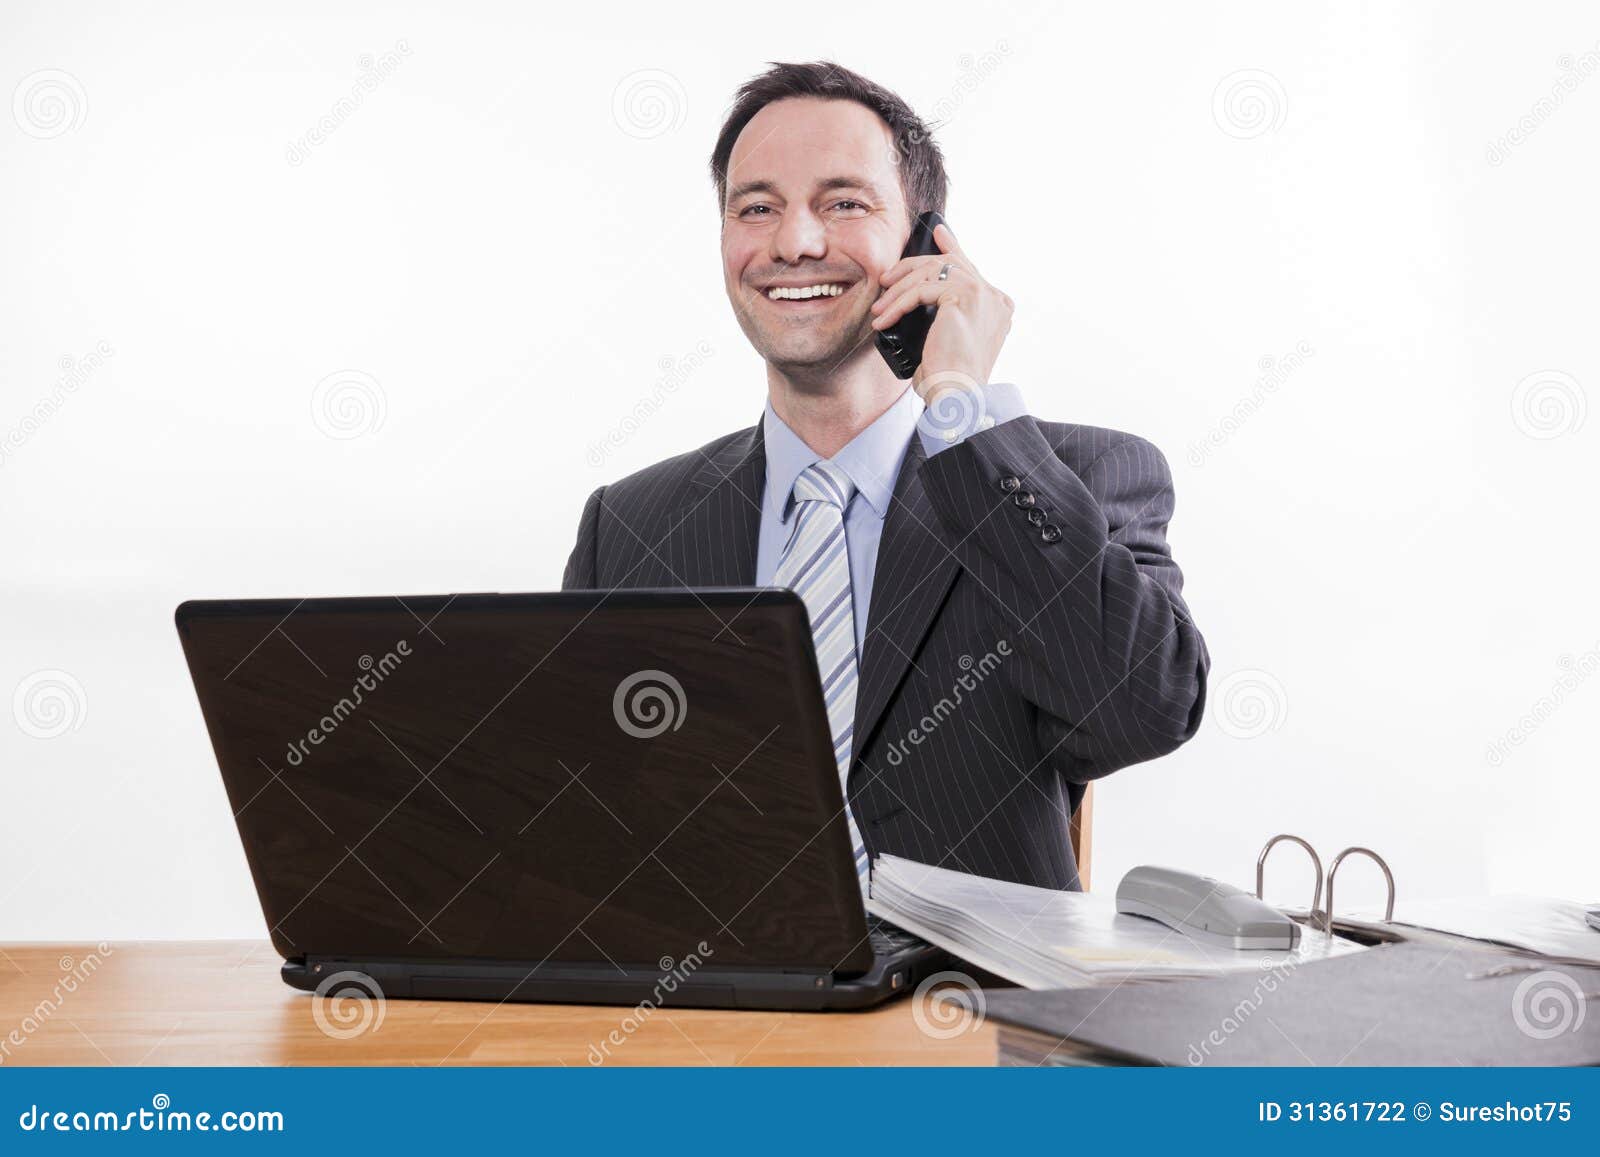 committed employee smiling at phone